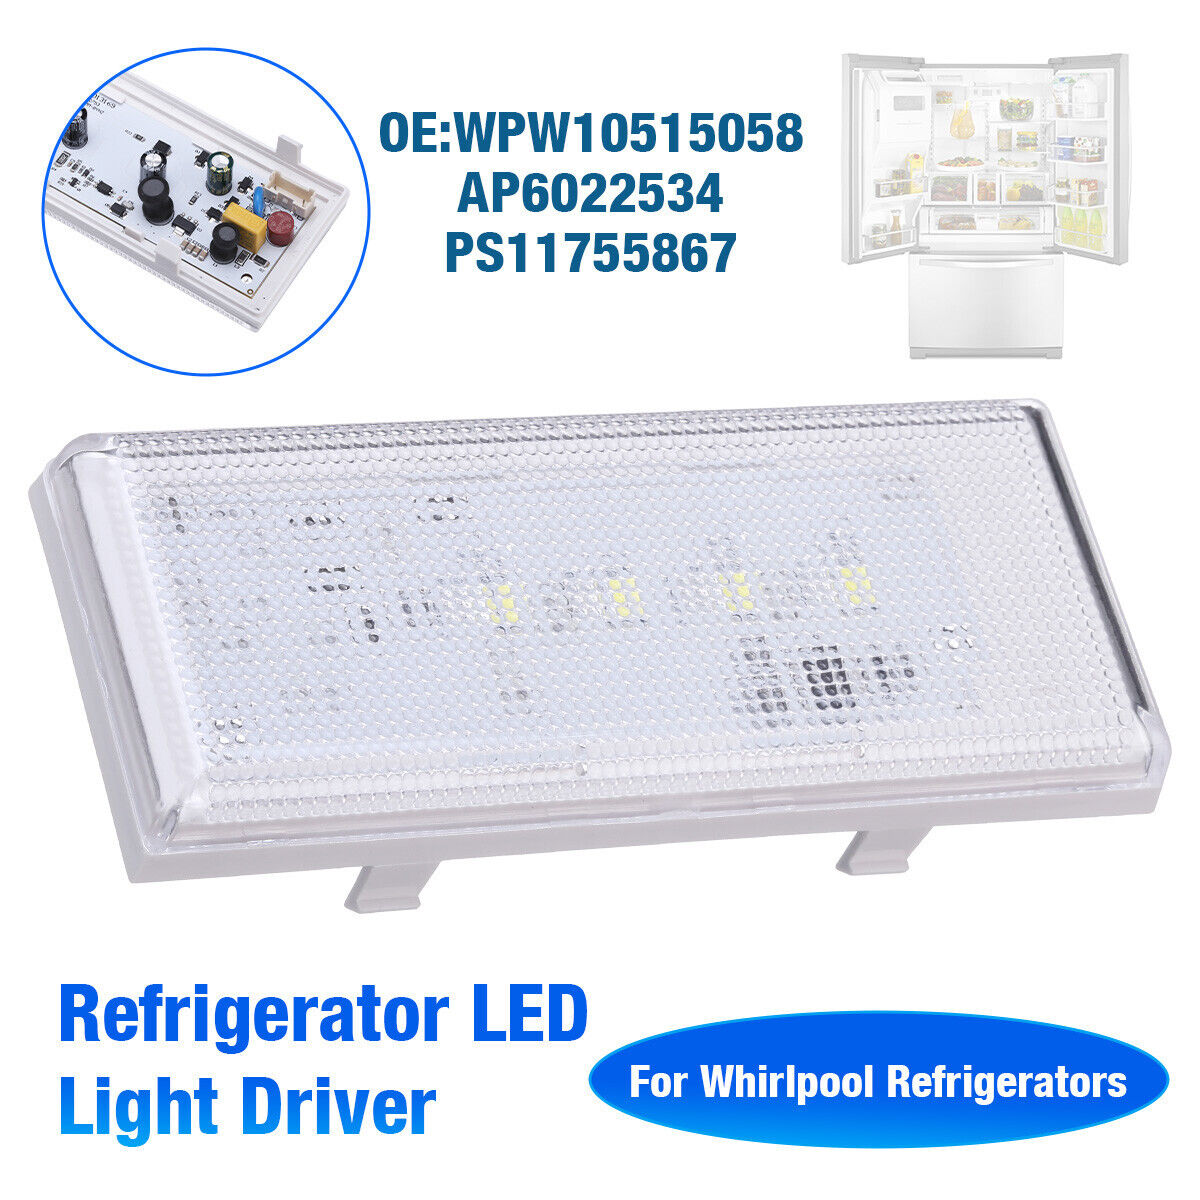 Great Choice Products GCP-1123-378907 W10515058 Led Light For Whirlpool  Refrigerator Wpw10515058 Ap6022534 Ps11755867